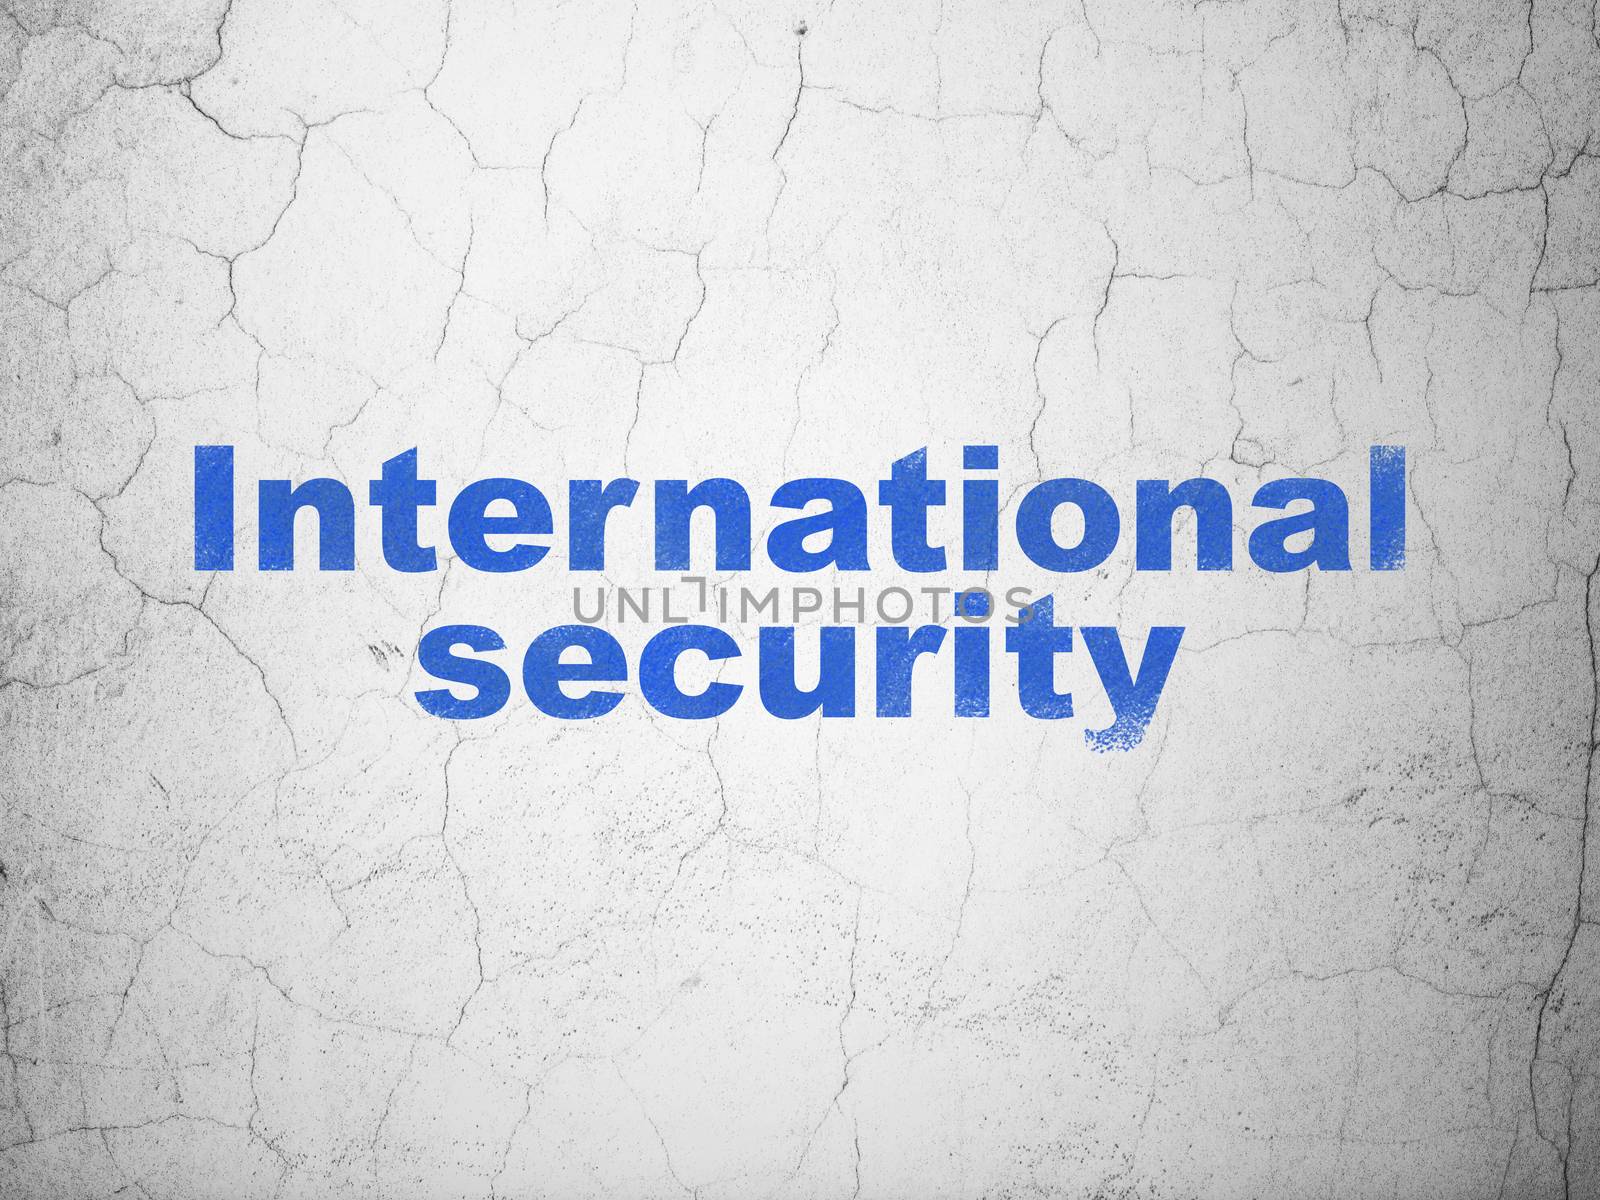 Protection concept: Blue International Security on textured concrete wall background